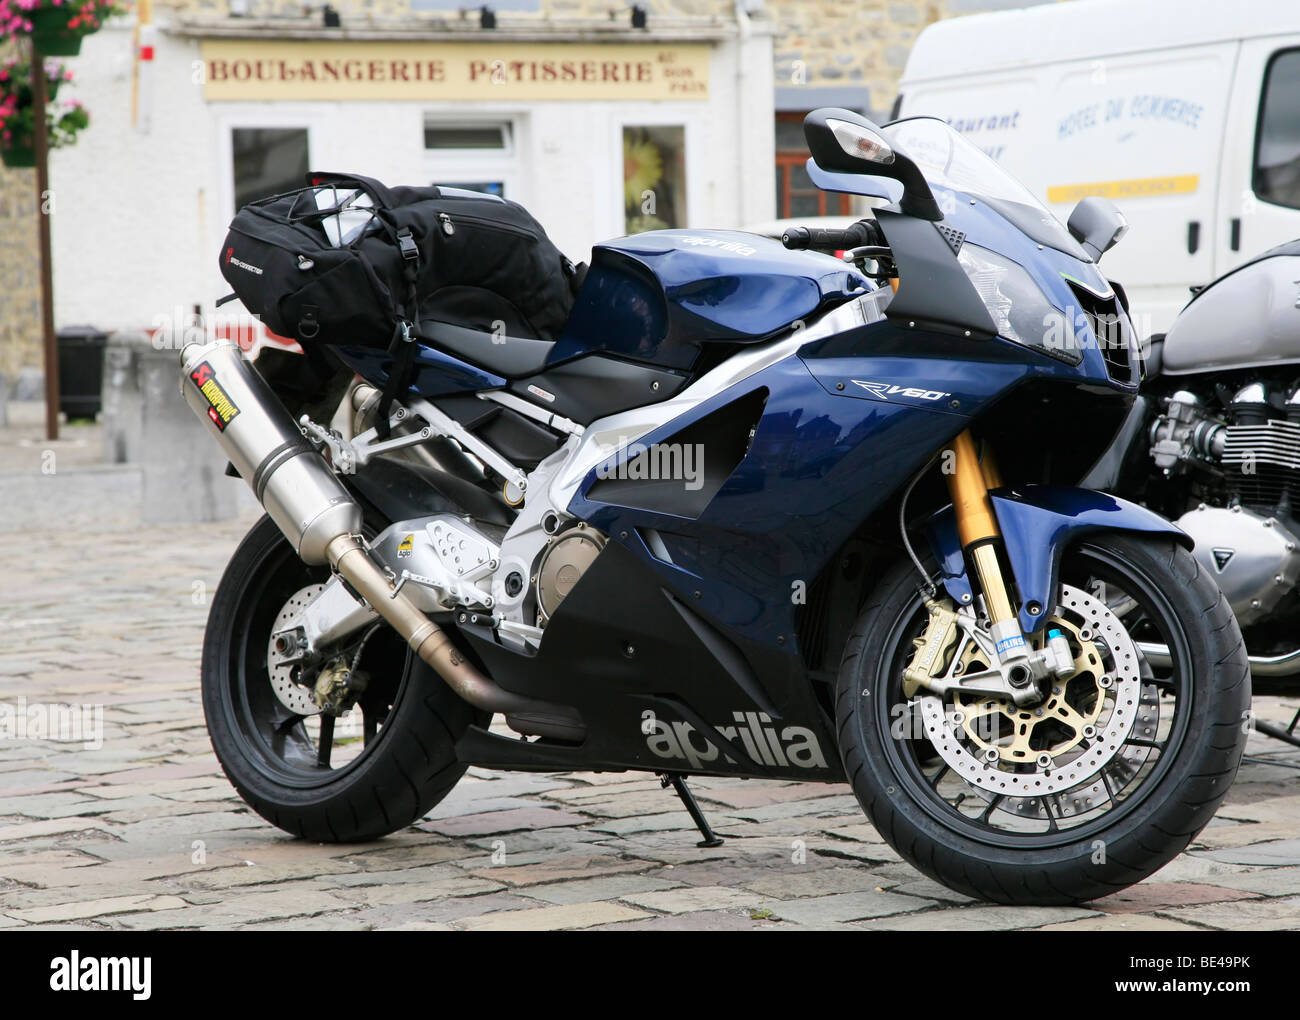 aprilia RSV 1000R motorcycle in french town Stock Photo